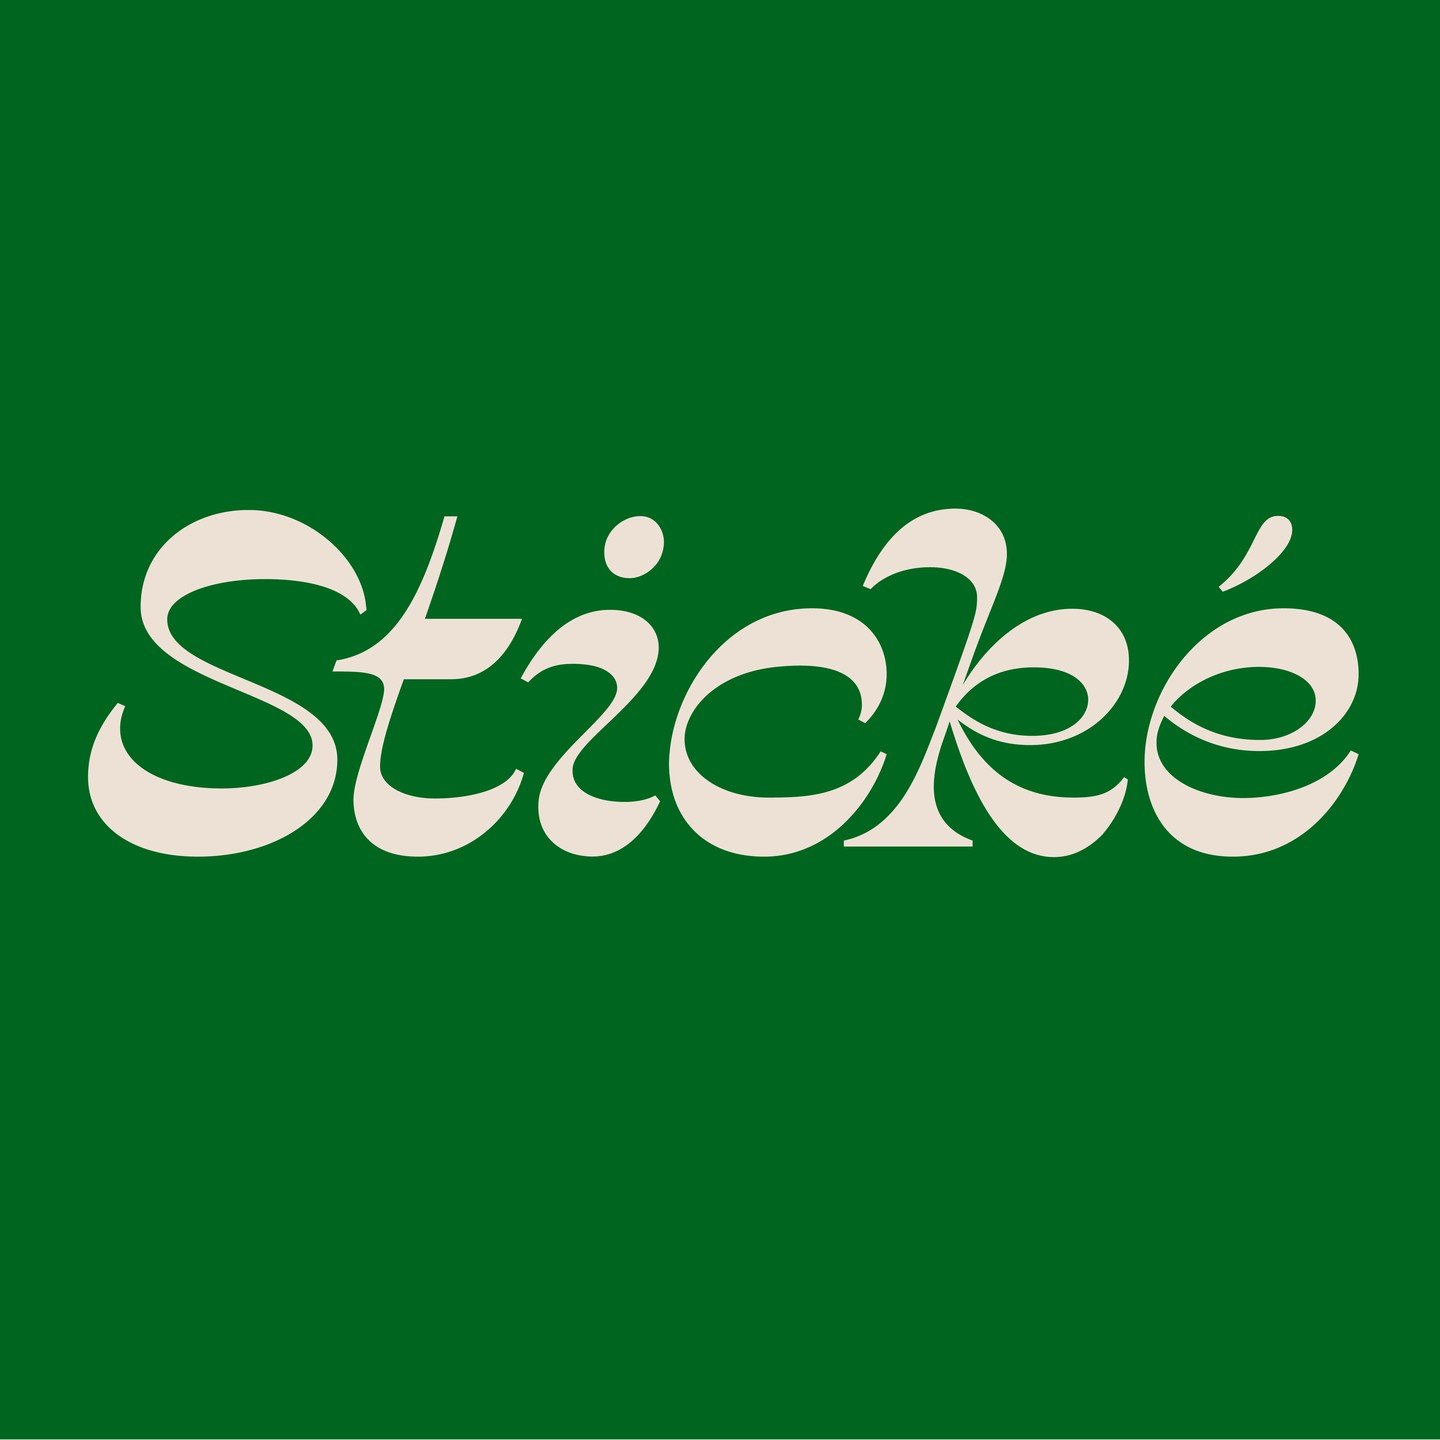 Anyone for Stick&eacute;?

Fun little brand we&rsquo;re working on for @harthampark 

Stick&eacute;, also called stick&eacute; tennis, is an indoor racquet sport invented in the late 19th century merging aspects of real tennis, racquets and lawn tenn